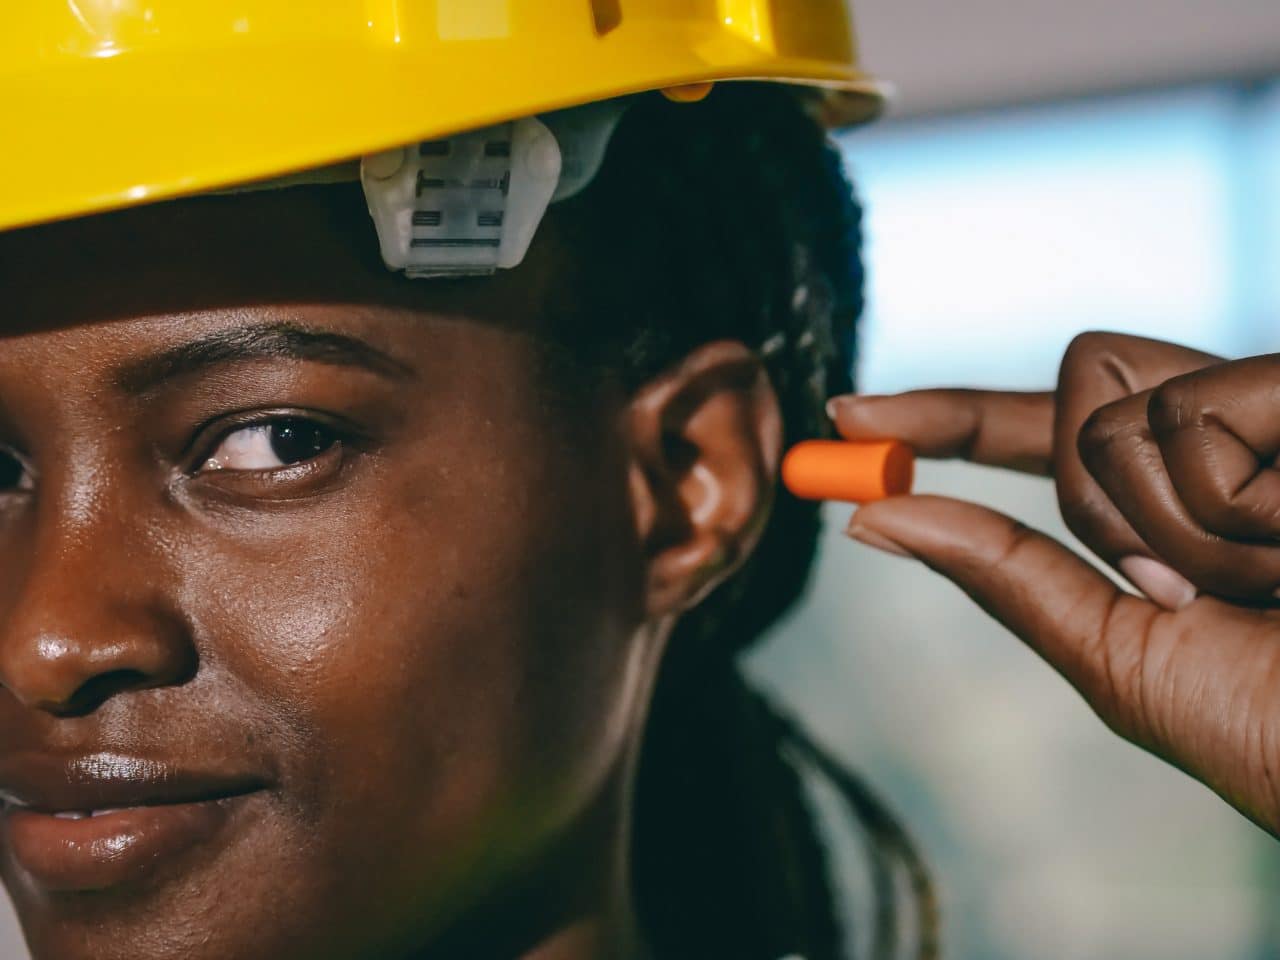 Female construction working putting in earplugs to protect her hearing.